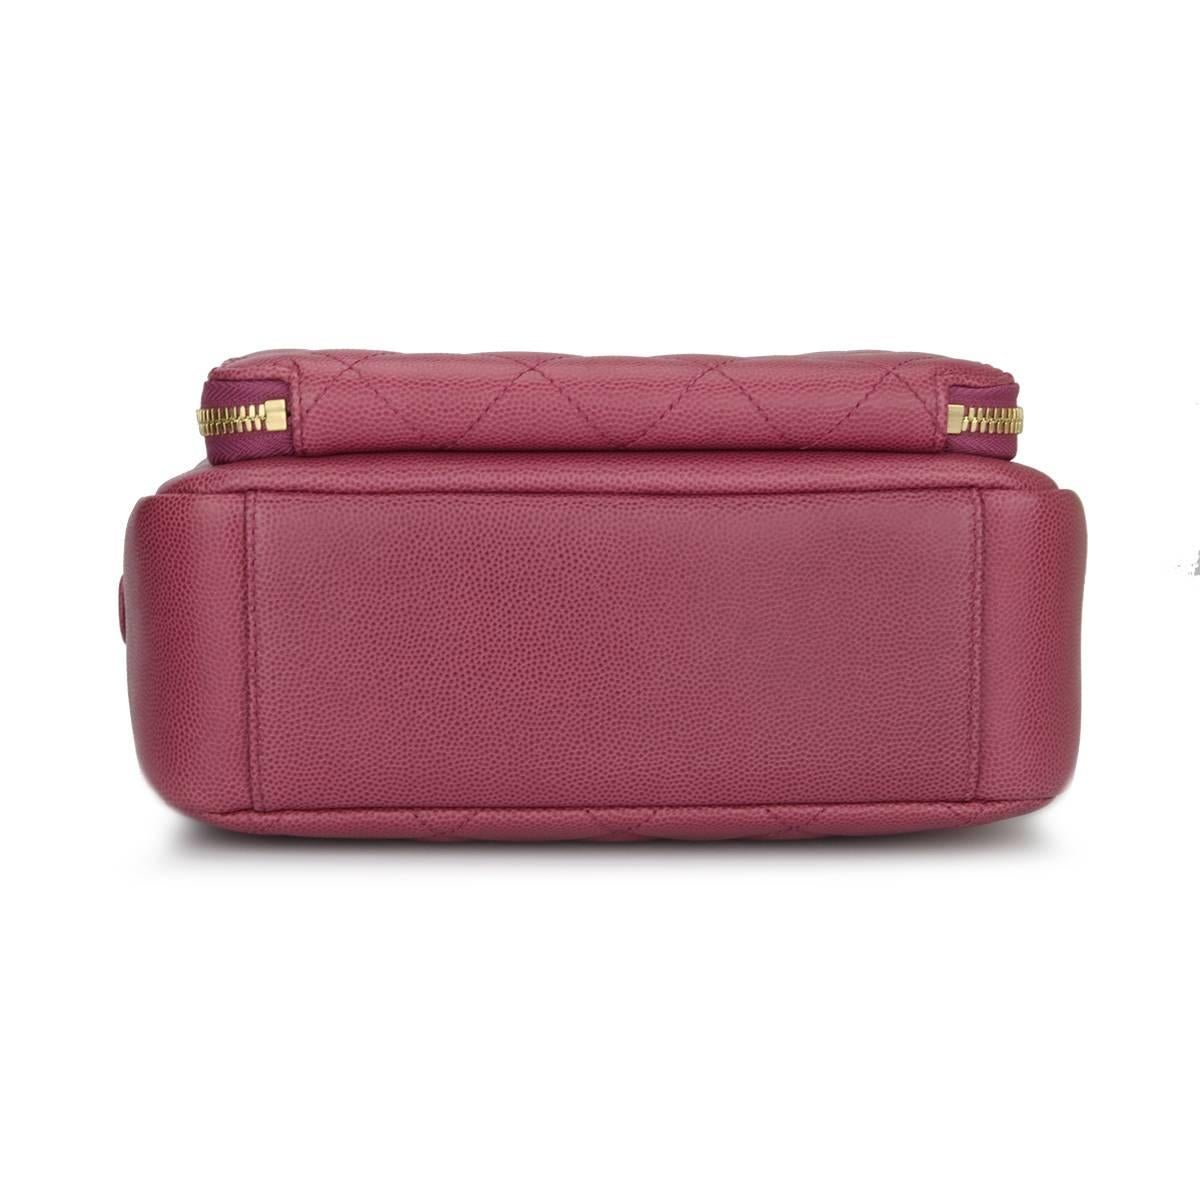 Brown CHANEL Business Affinity Camera Case Pink Caviar with Gold Hardware 2016